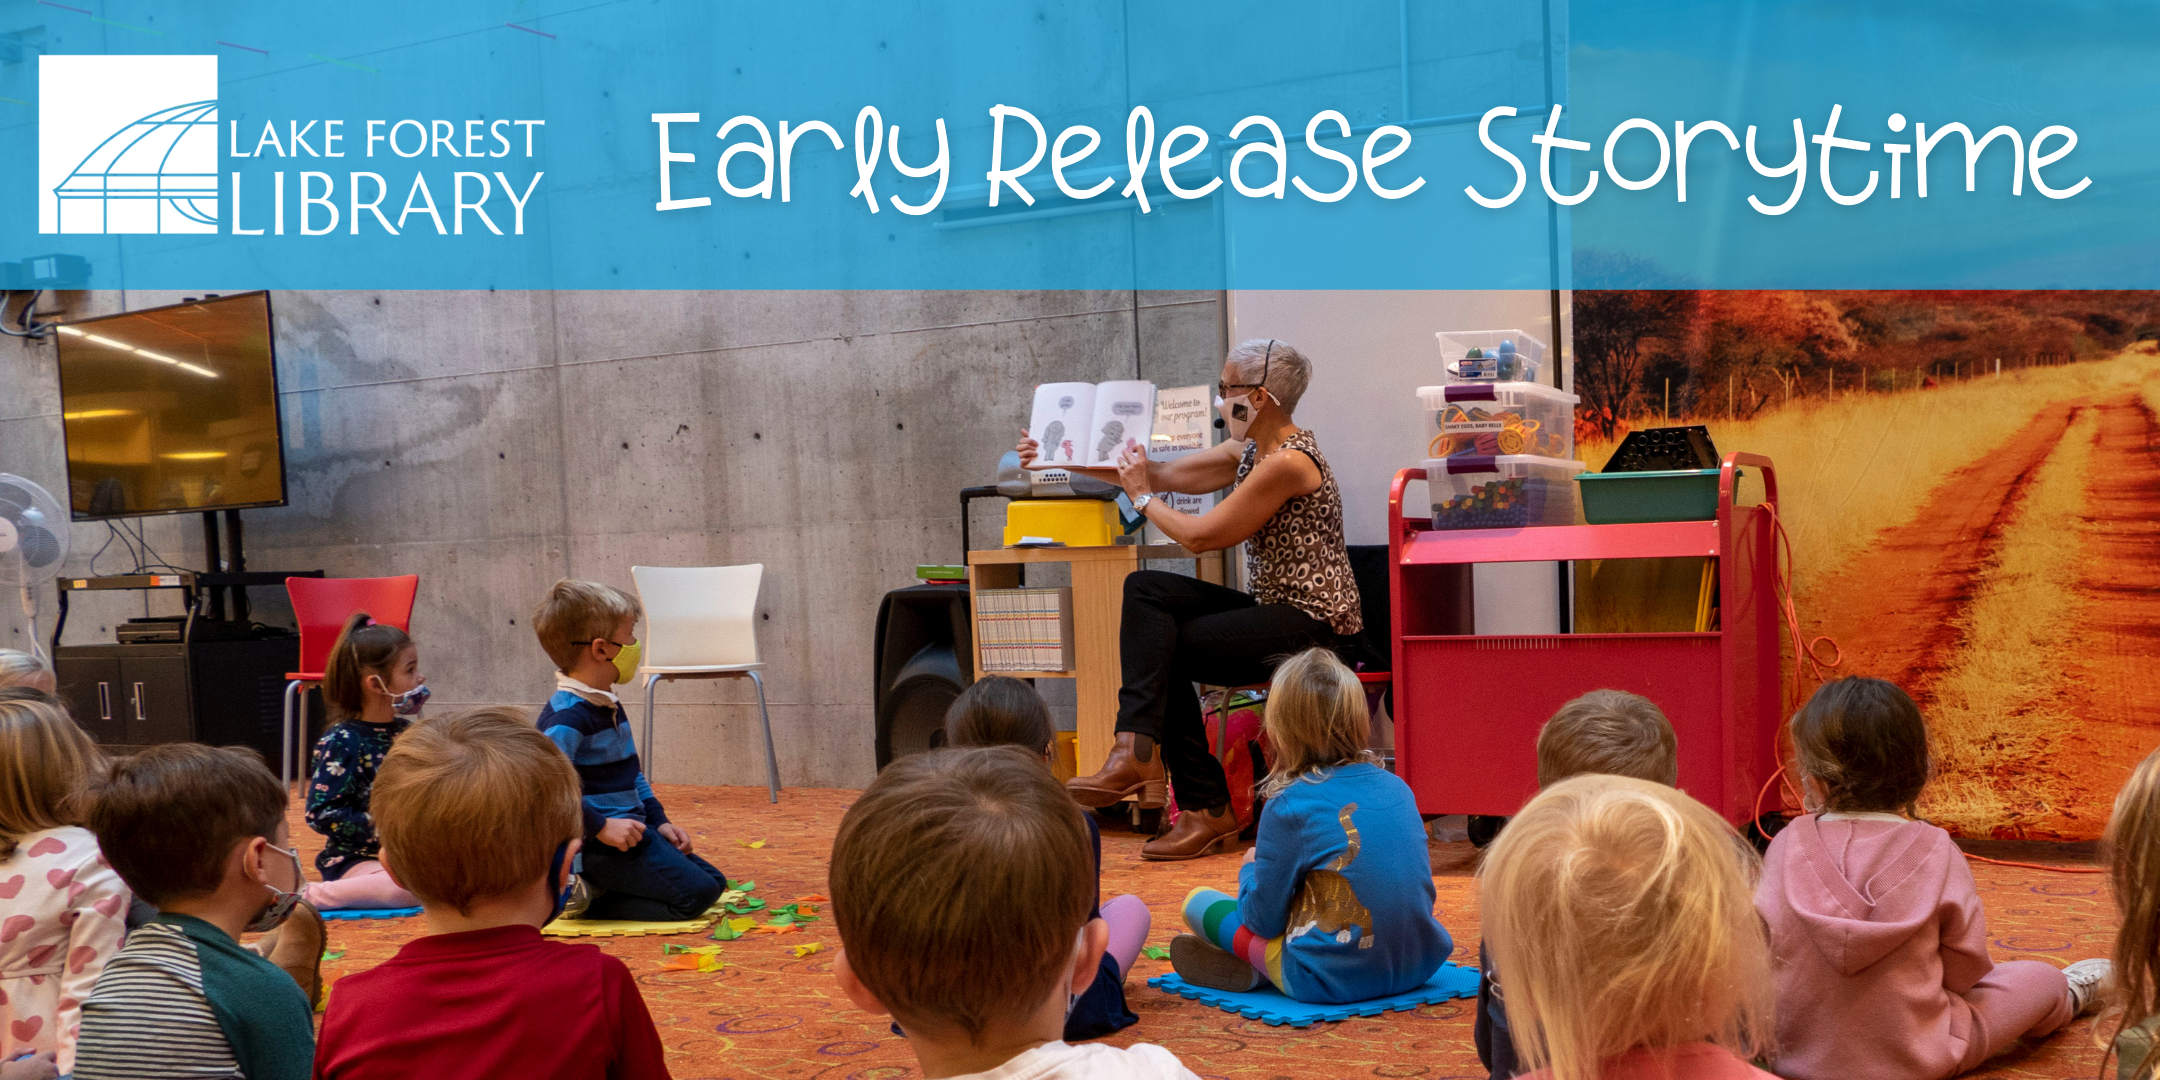 image of "Early Release Storytime"